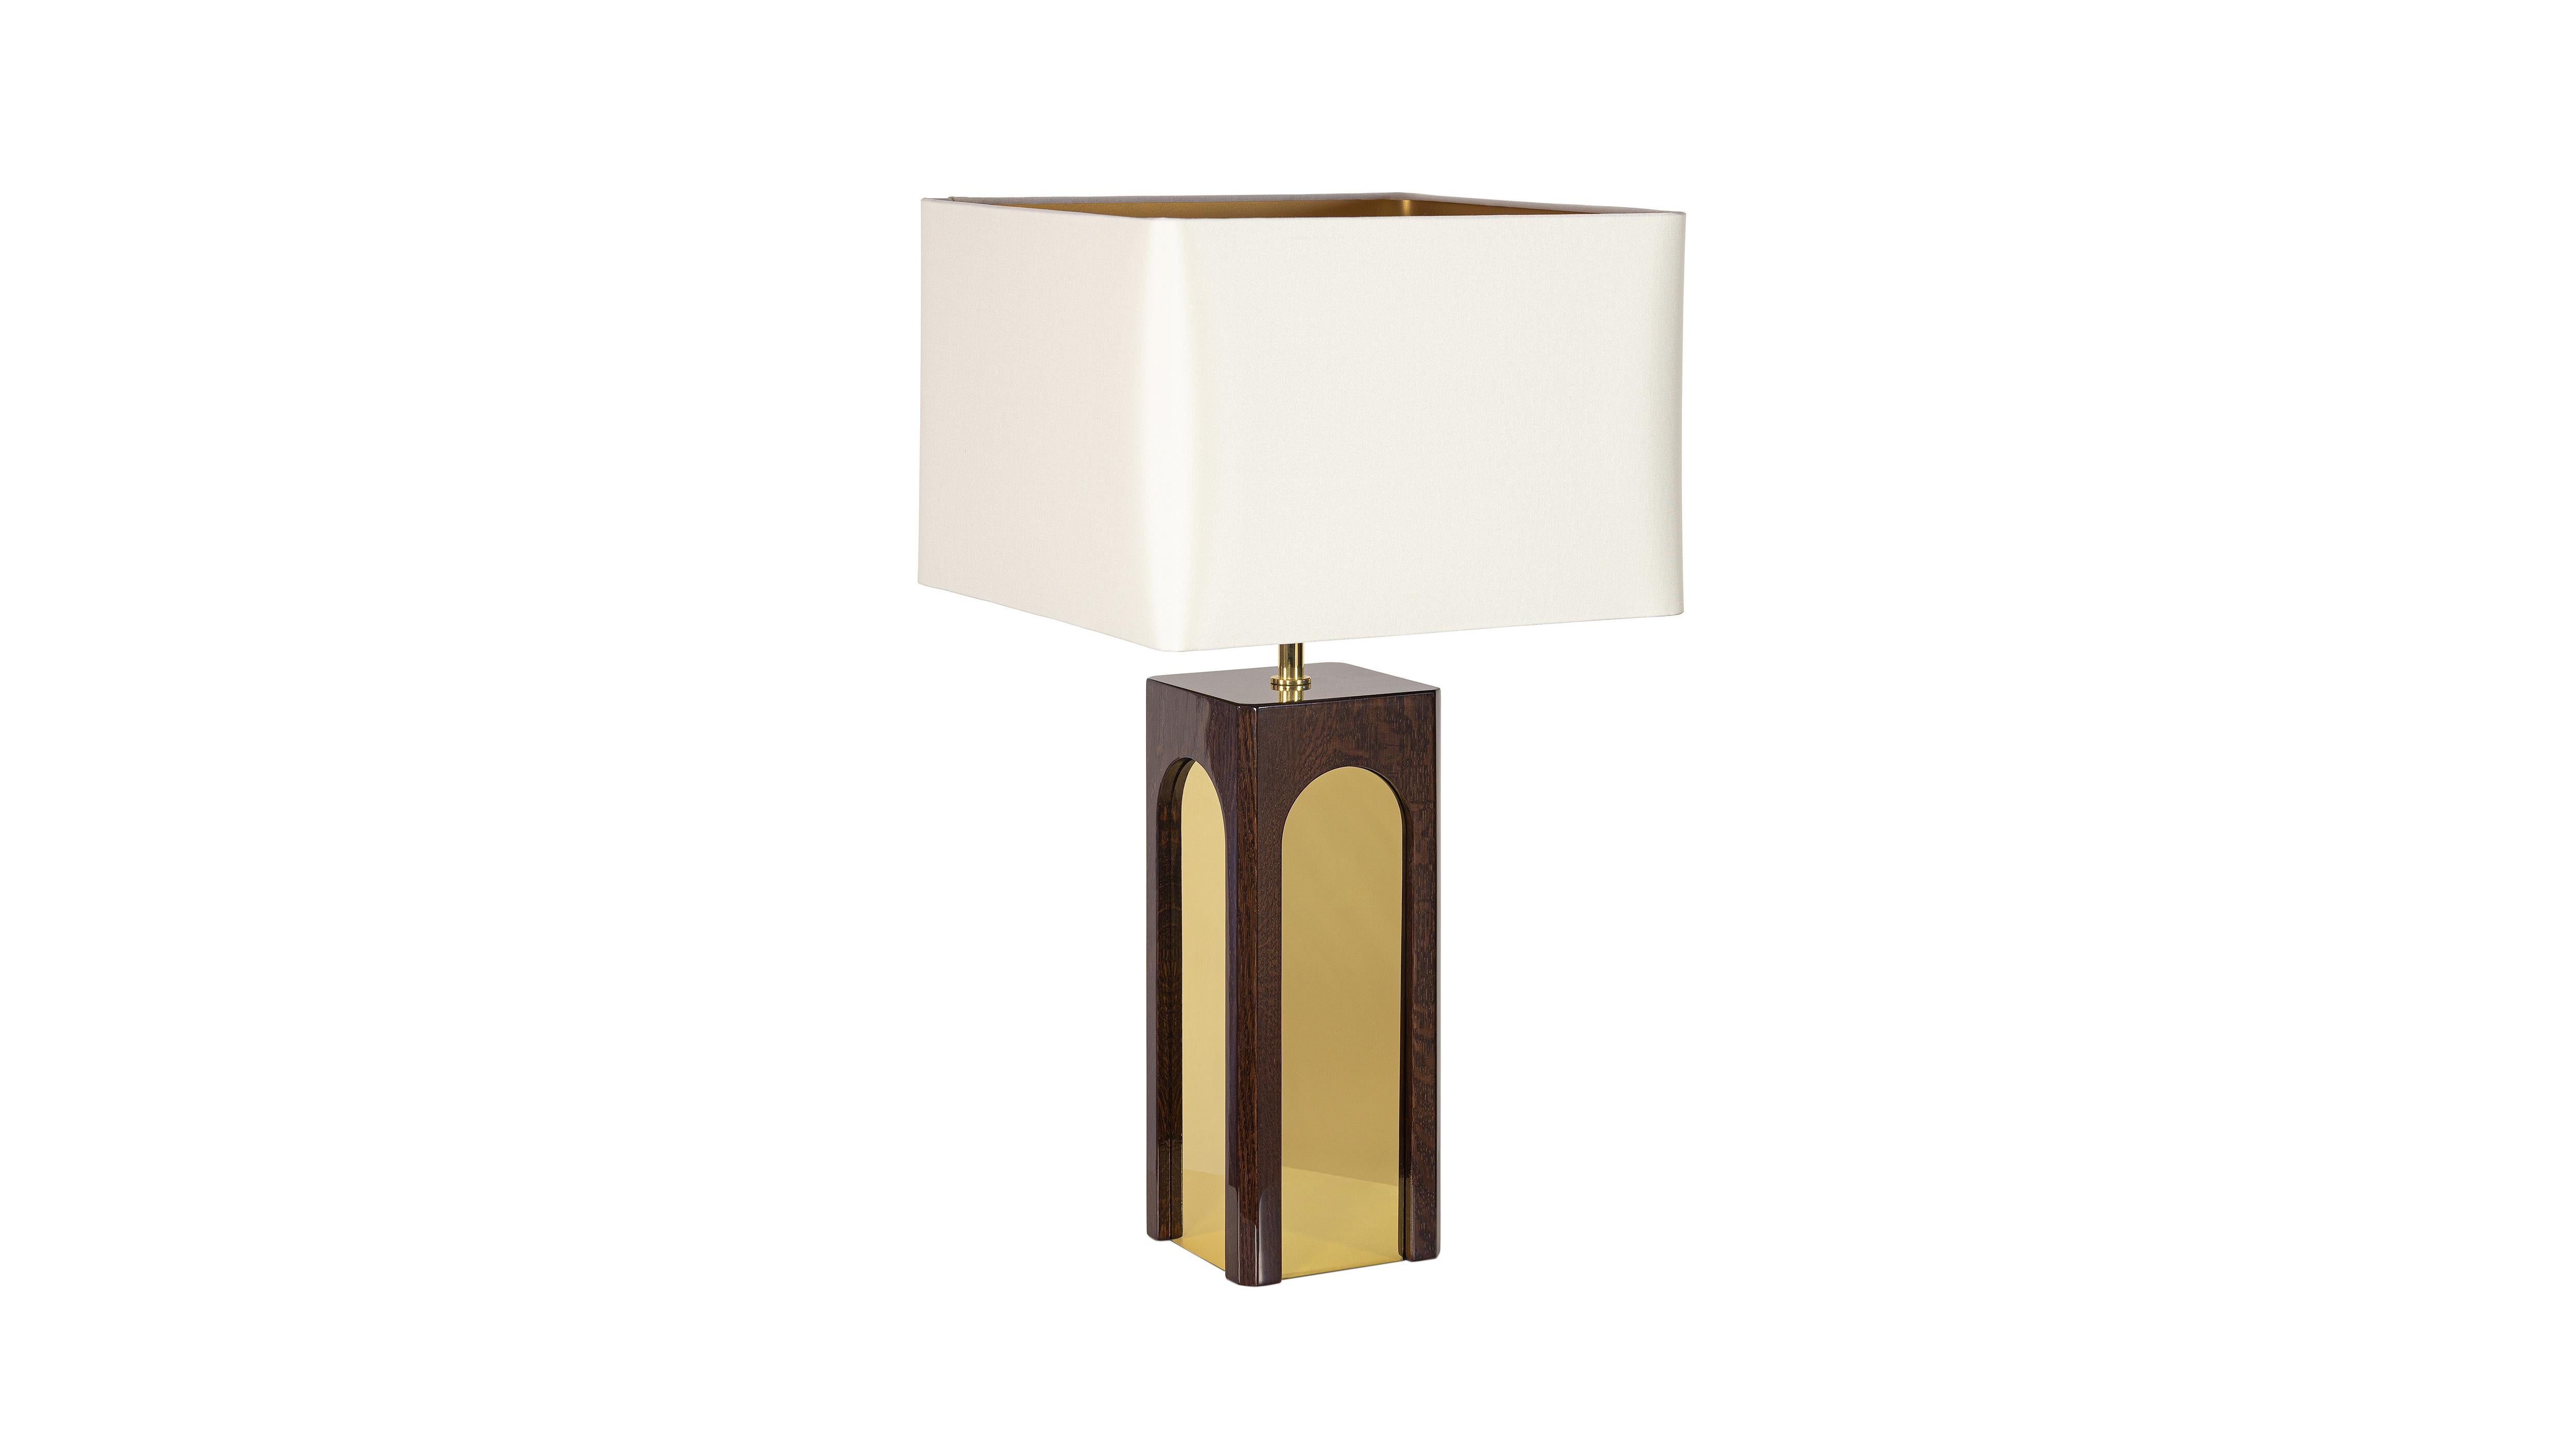 Metropolitan Oak Table Lamp by InsidherLand
Dimensions: D 35 x W 35 x H 65 cm.
Materials: Satin ref. Pearl with Gold, wood structure with translucent dark brown in high gloss varnish and polished brass.
4 kg.

Located in New York, USA, the Lincoln